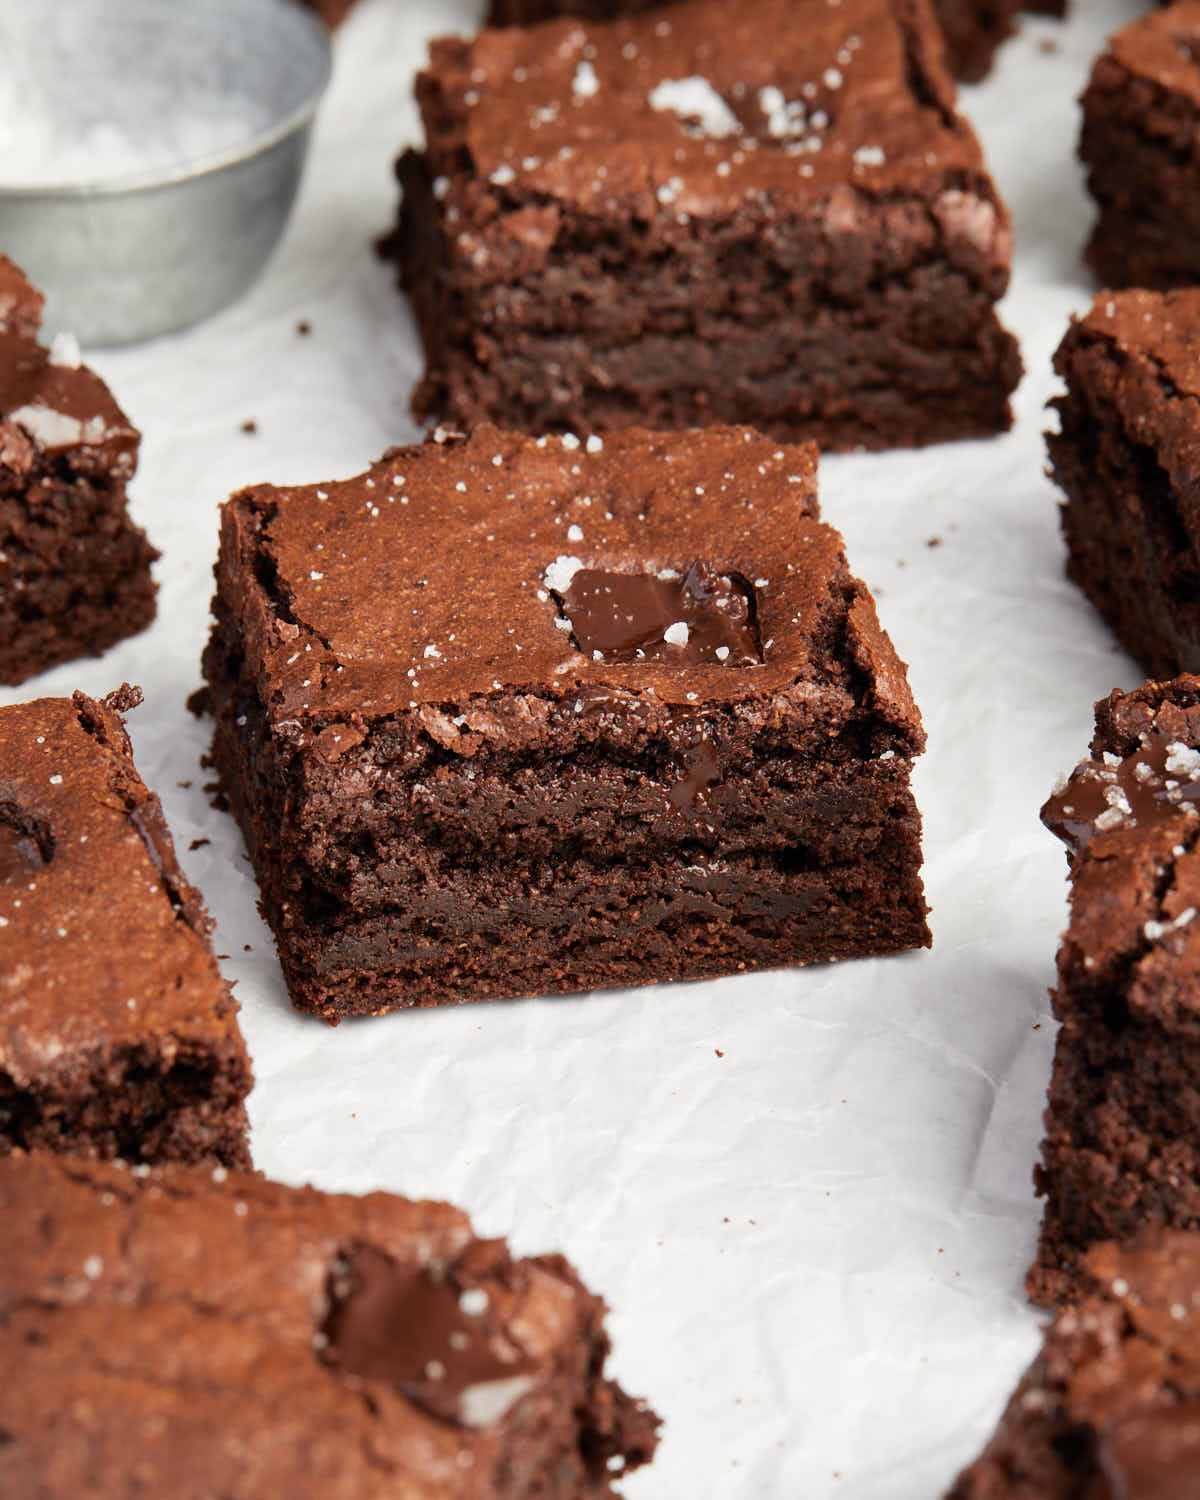 Three-quarter view of brownies arranged on parchment paper.